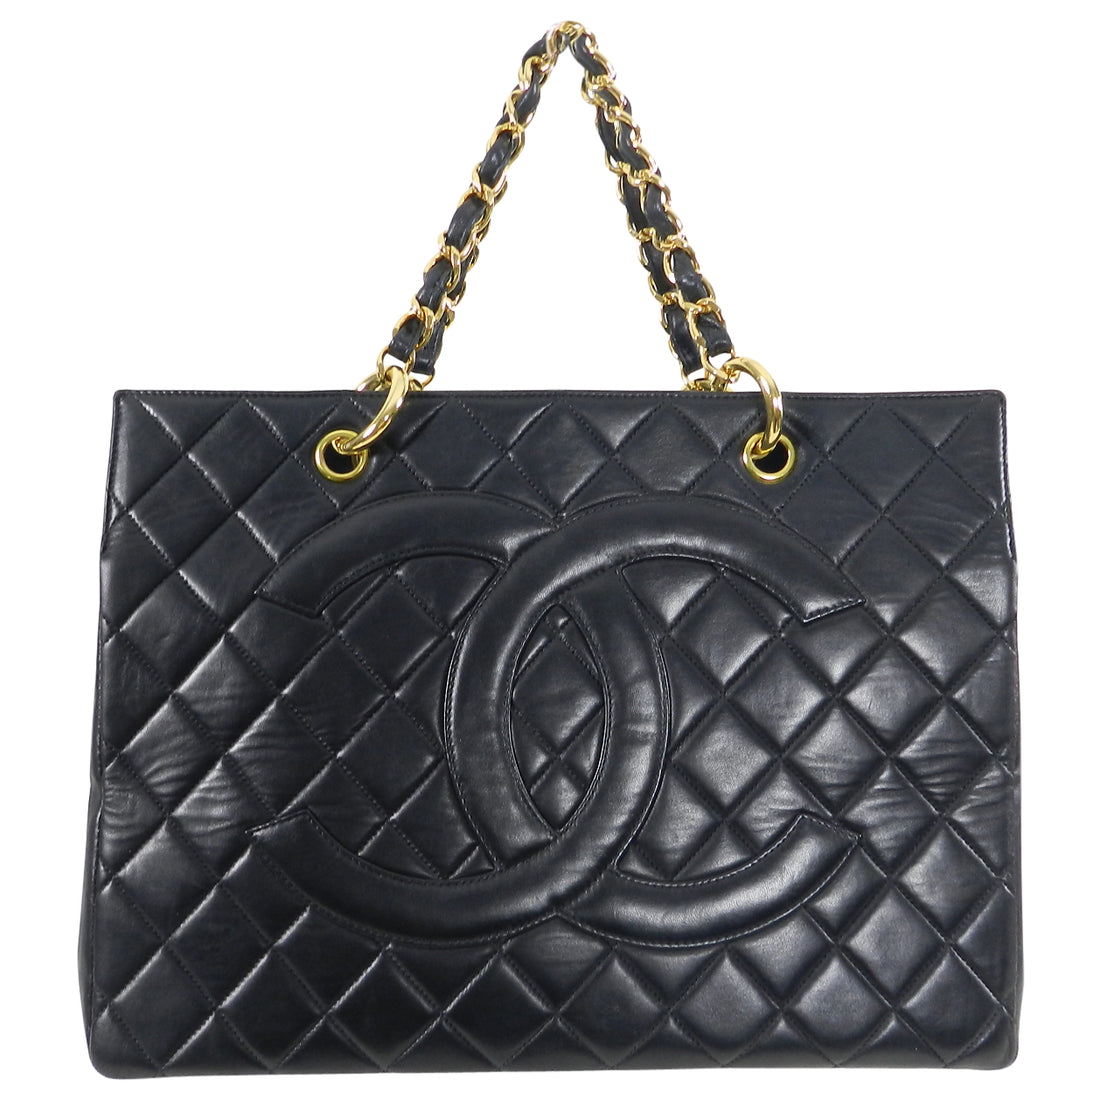 Best Chanel Bags To Invest In: 14 Timeless Styles